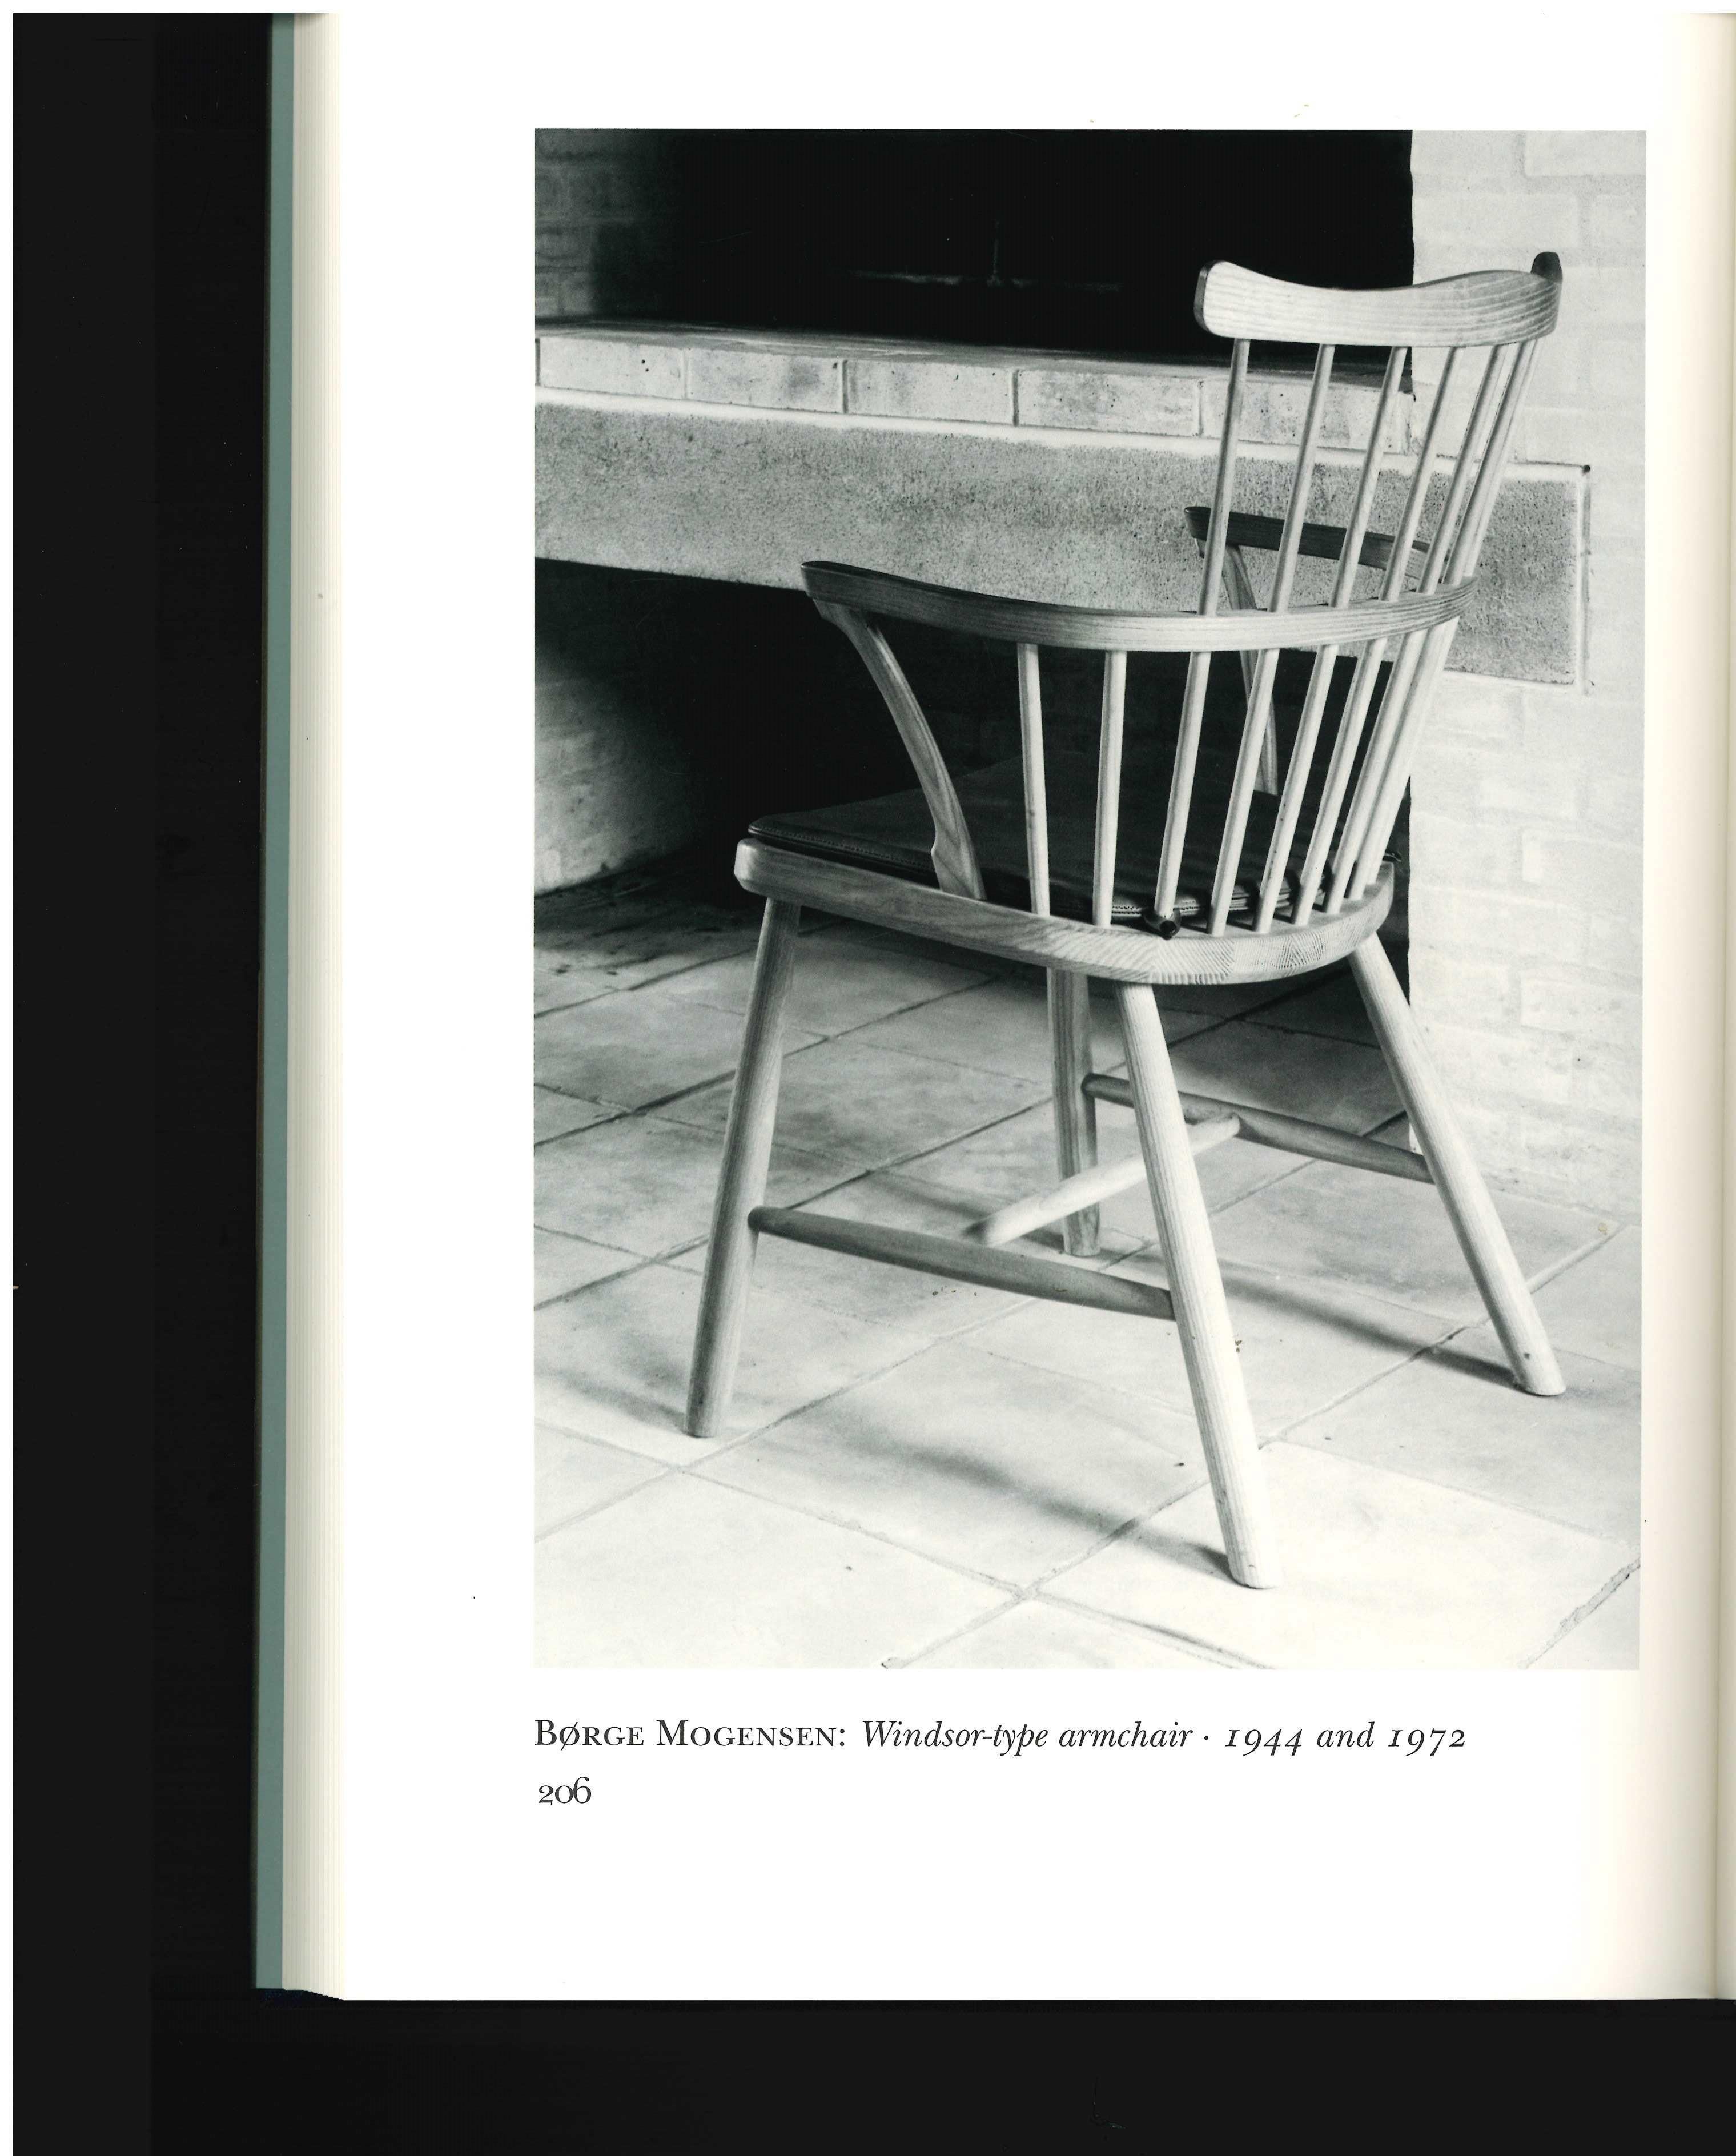 Danish Furniture Design in the 20th Century by Arne Karlsen (Books) For Sale 1